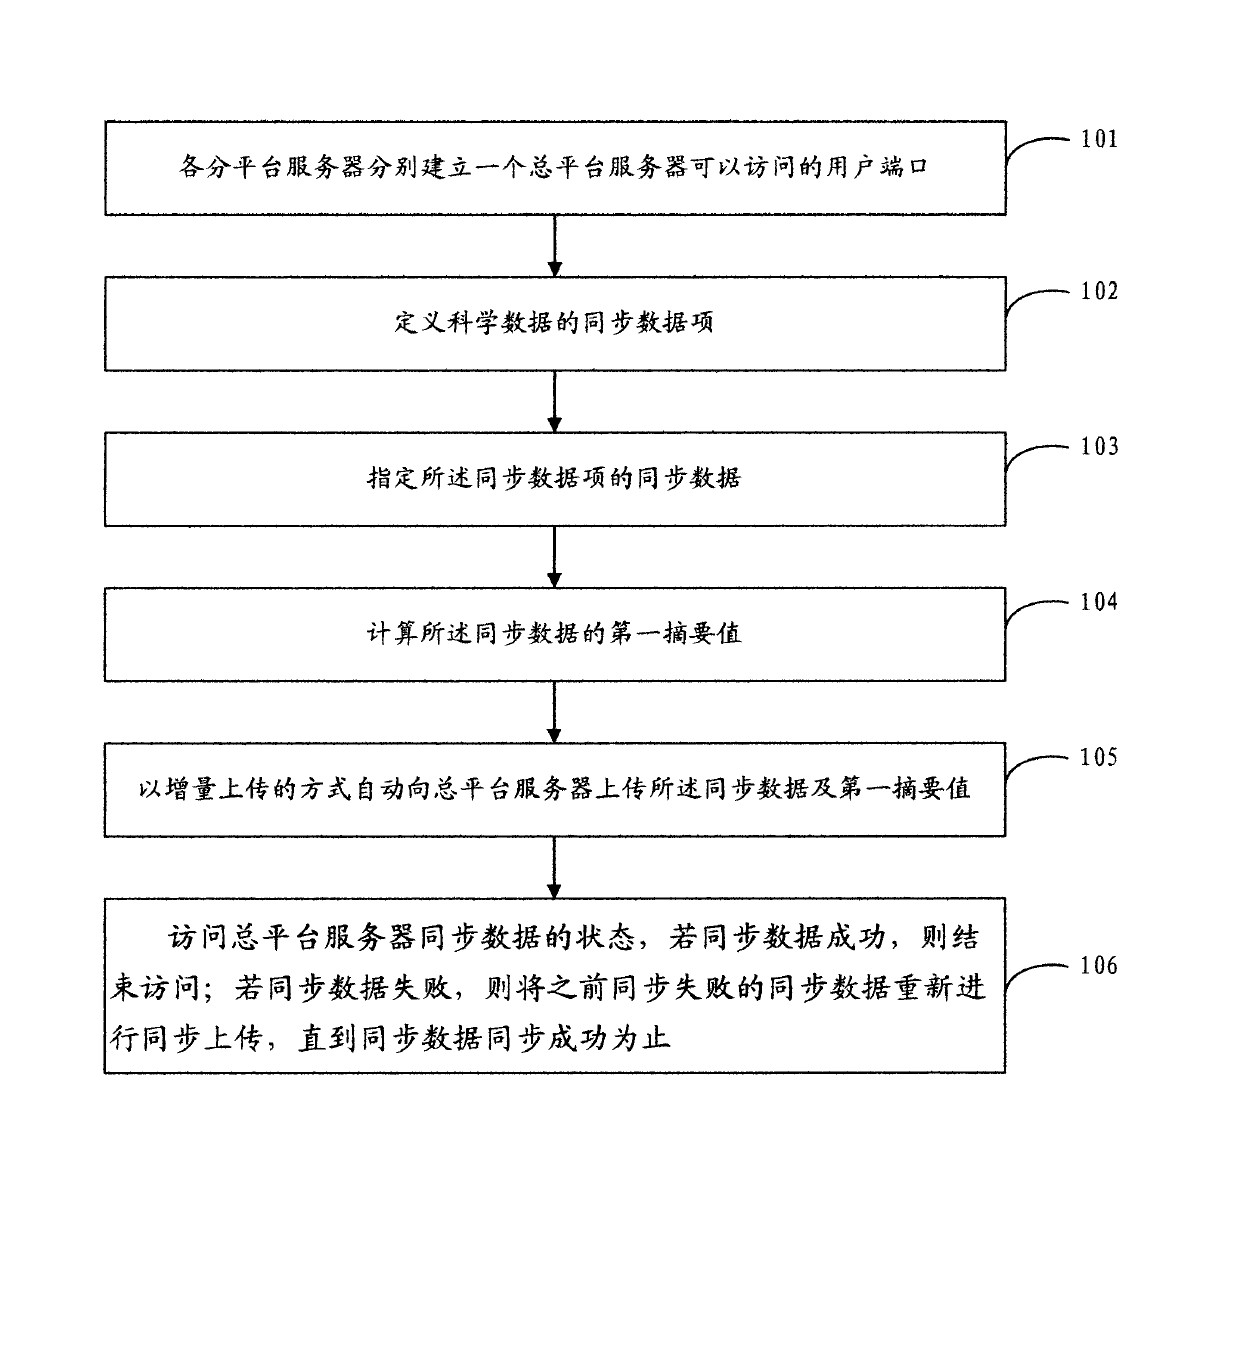 Centralized scientific data synchronization method and system